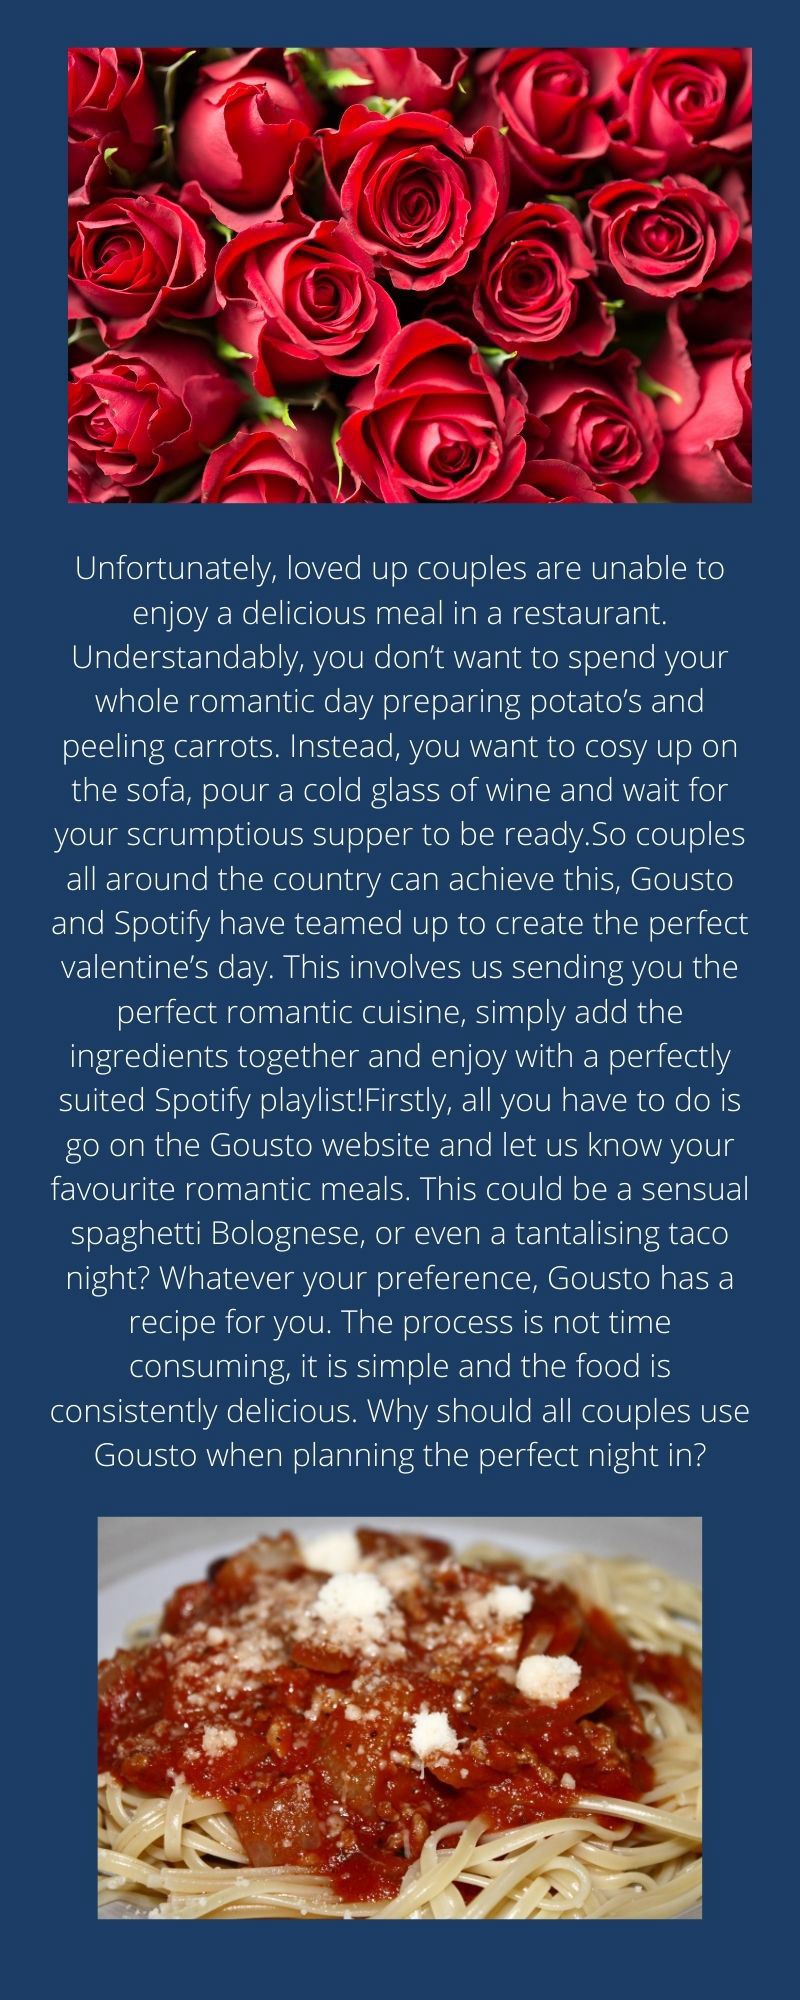 beats cookingwithmusic couples gousto Homecooking Love romance spotify valentines